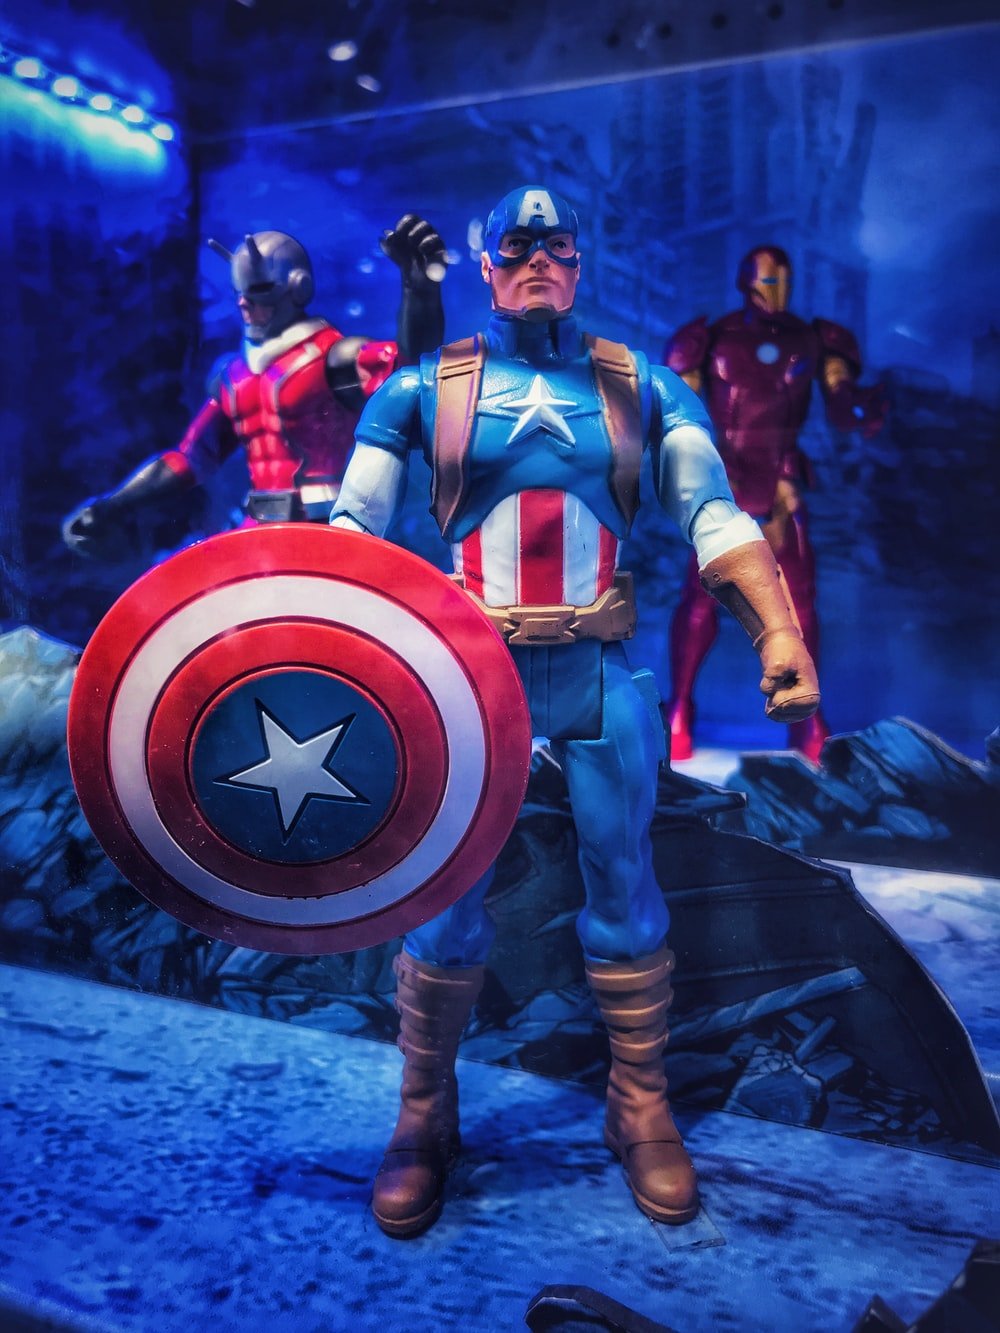 Superhero Picture [HD]. Download Free Image